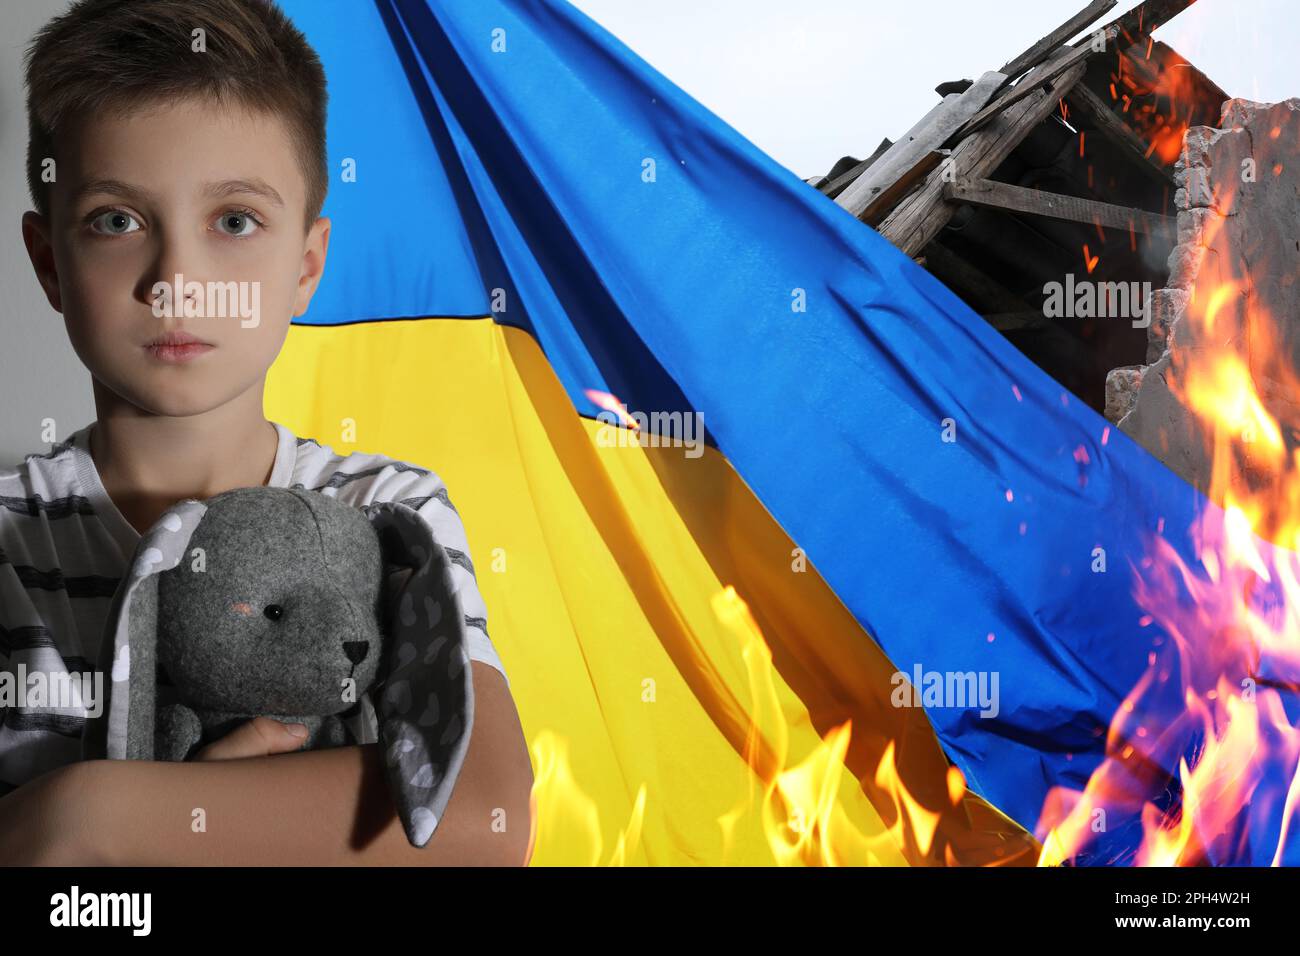 Sad little boy with toy, national flag and ruined house on fire. Stop war in Ukraine Stock Photo